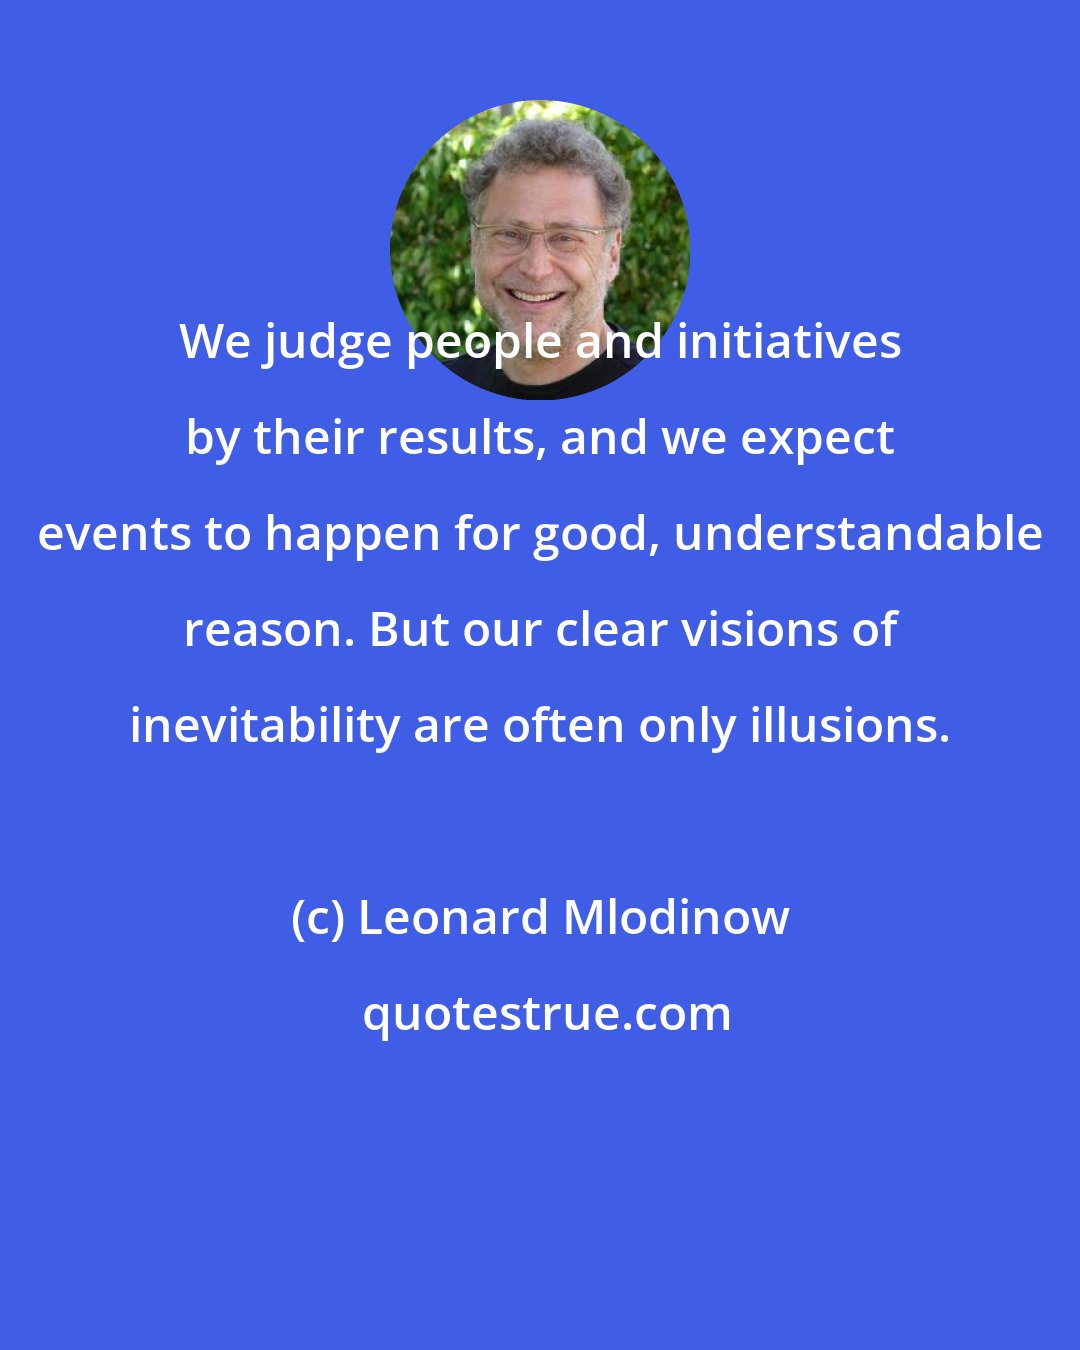 Leonard Mlodinow: We judge people and initiatives by their results, and we expect events to happen for good, understandable reason. But our clear visions of inevitability are often only illusions.